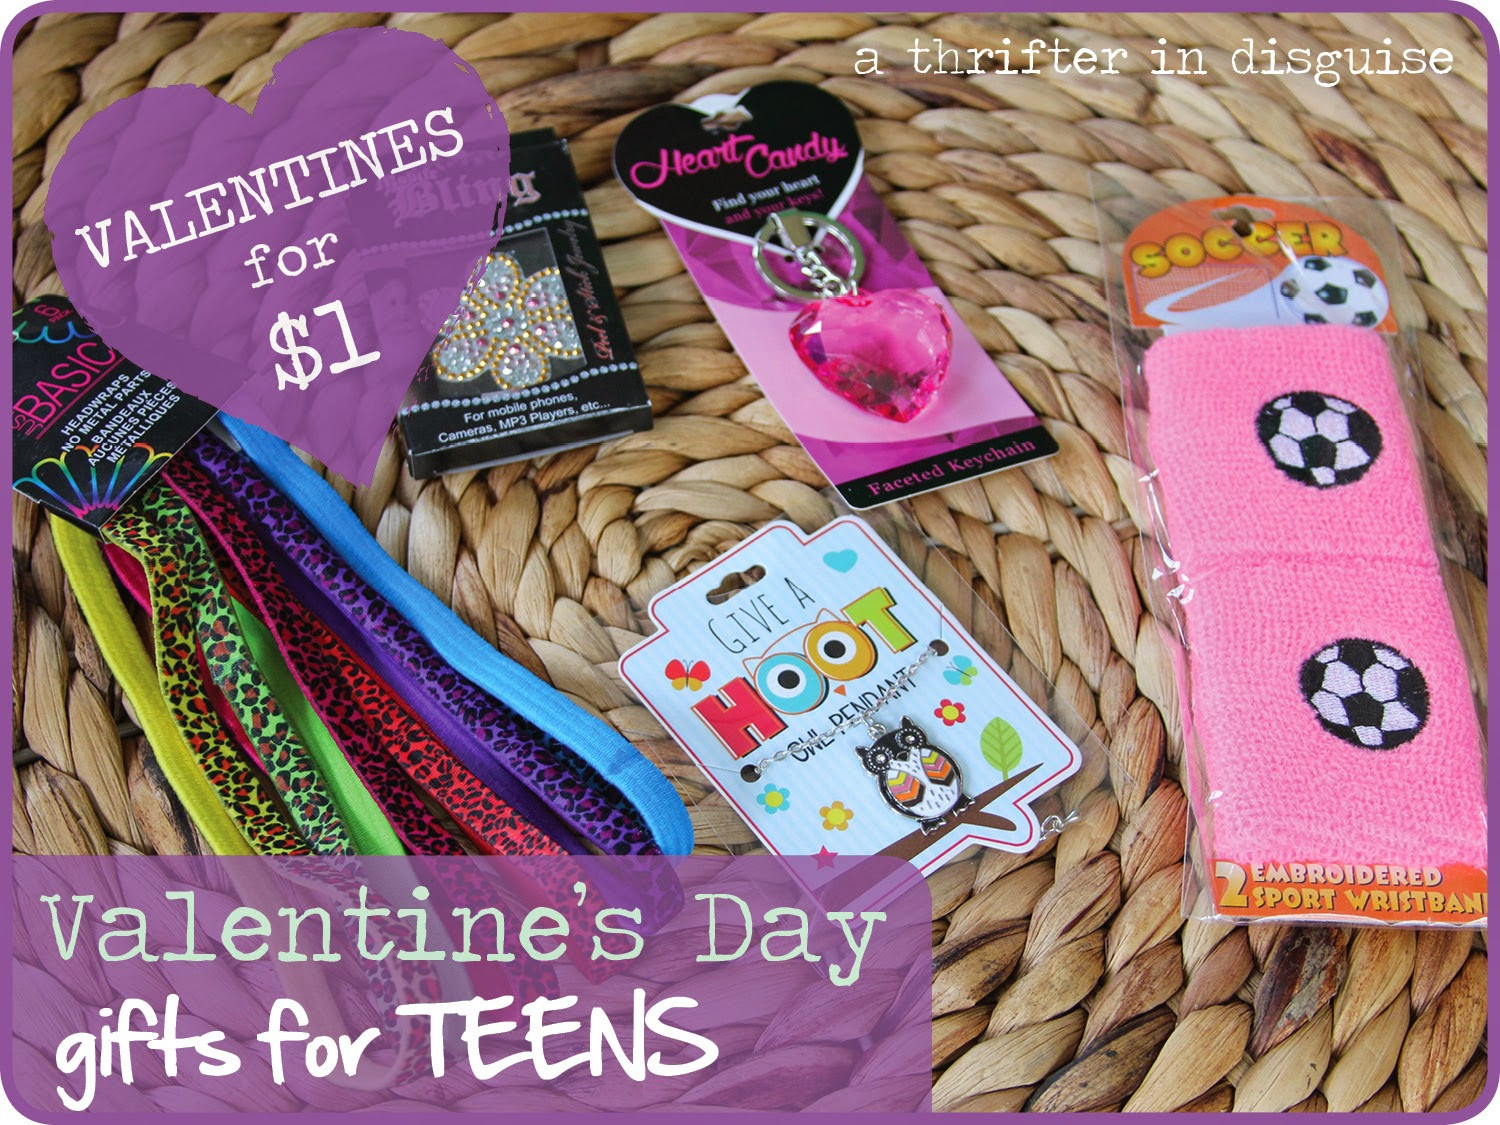 Valentines Gift Ideas For Young Daughter
 A Thrifter in Disguise More $1 Valentine s Day Gifts